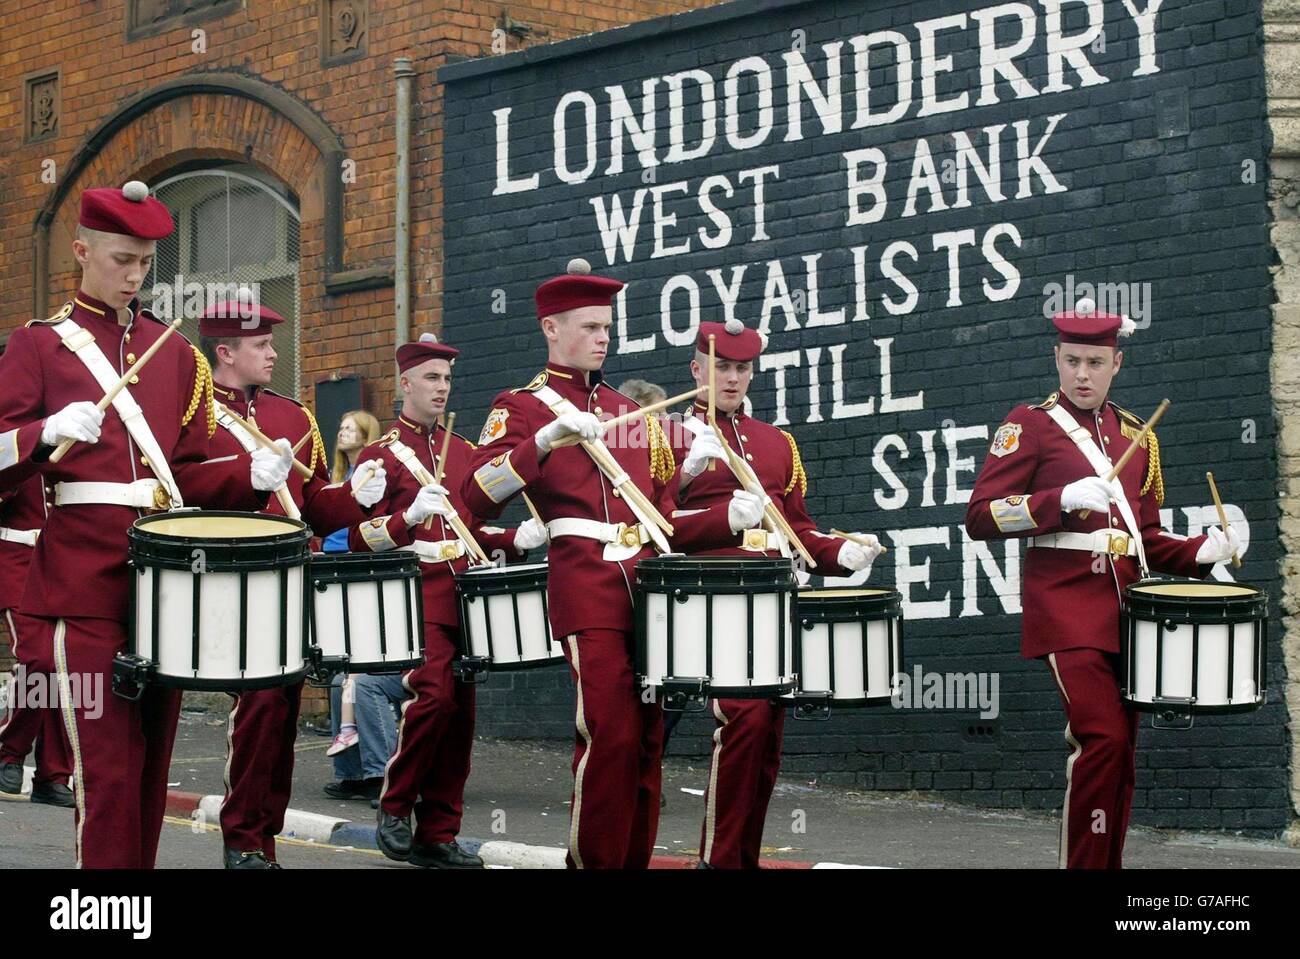 Some of the thousands of bandsmen taking part in the main Apprentice Boys parade in Londonderry. The annual parade marks the raising of the siege of Londonderry in 1689. About 15,000 Apprentice Boys took part in the demonstration, which began when several hundred members accompanied by three bands paraded along the city's historic walls. Stock Photo